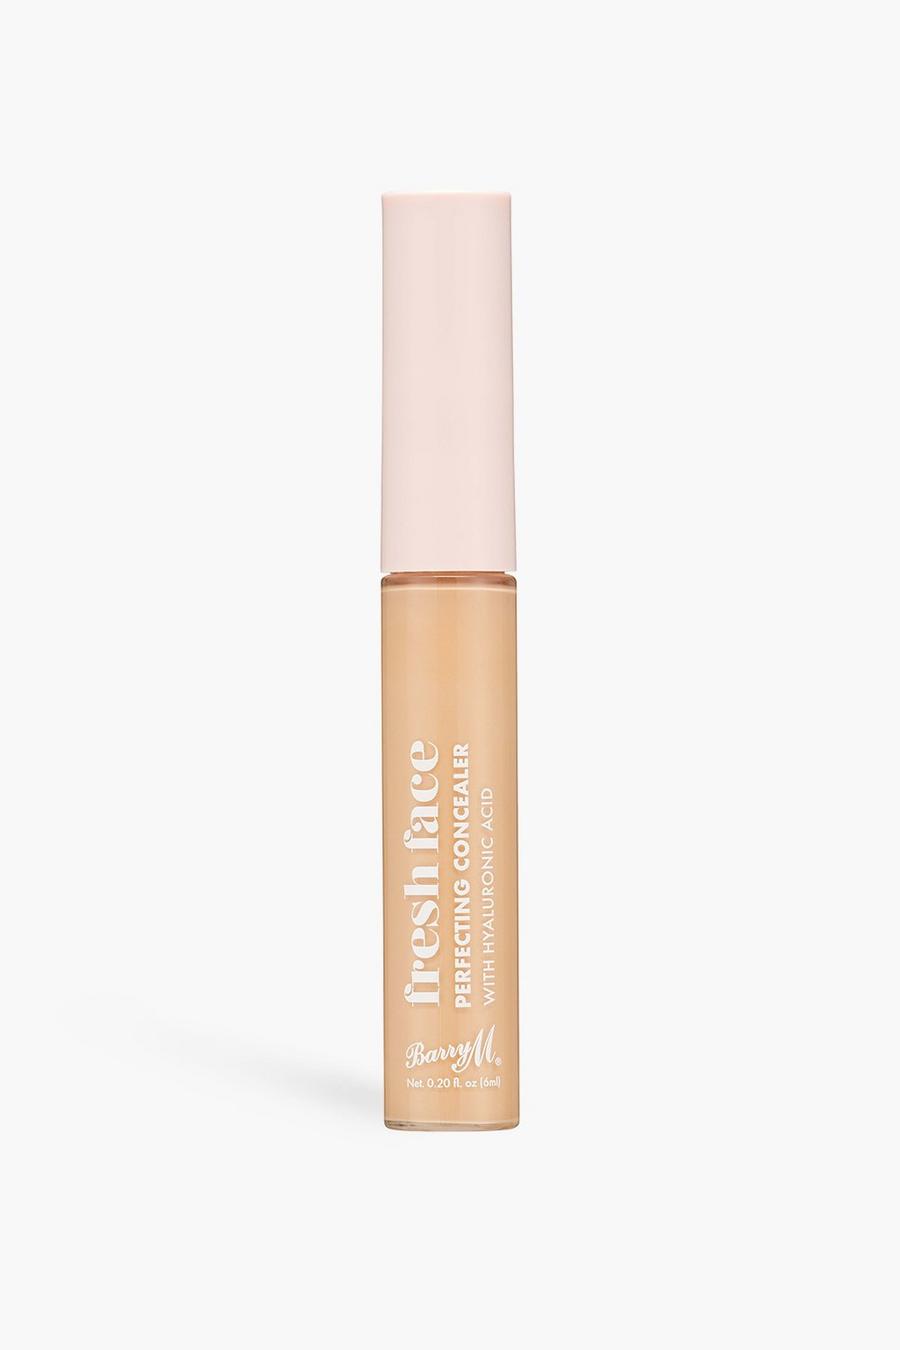 Tan brun Barry M Fresh Face Perfecting Concealer 4